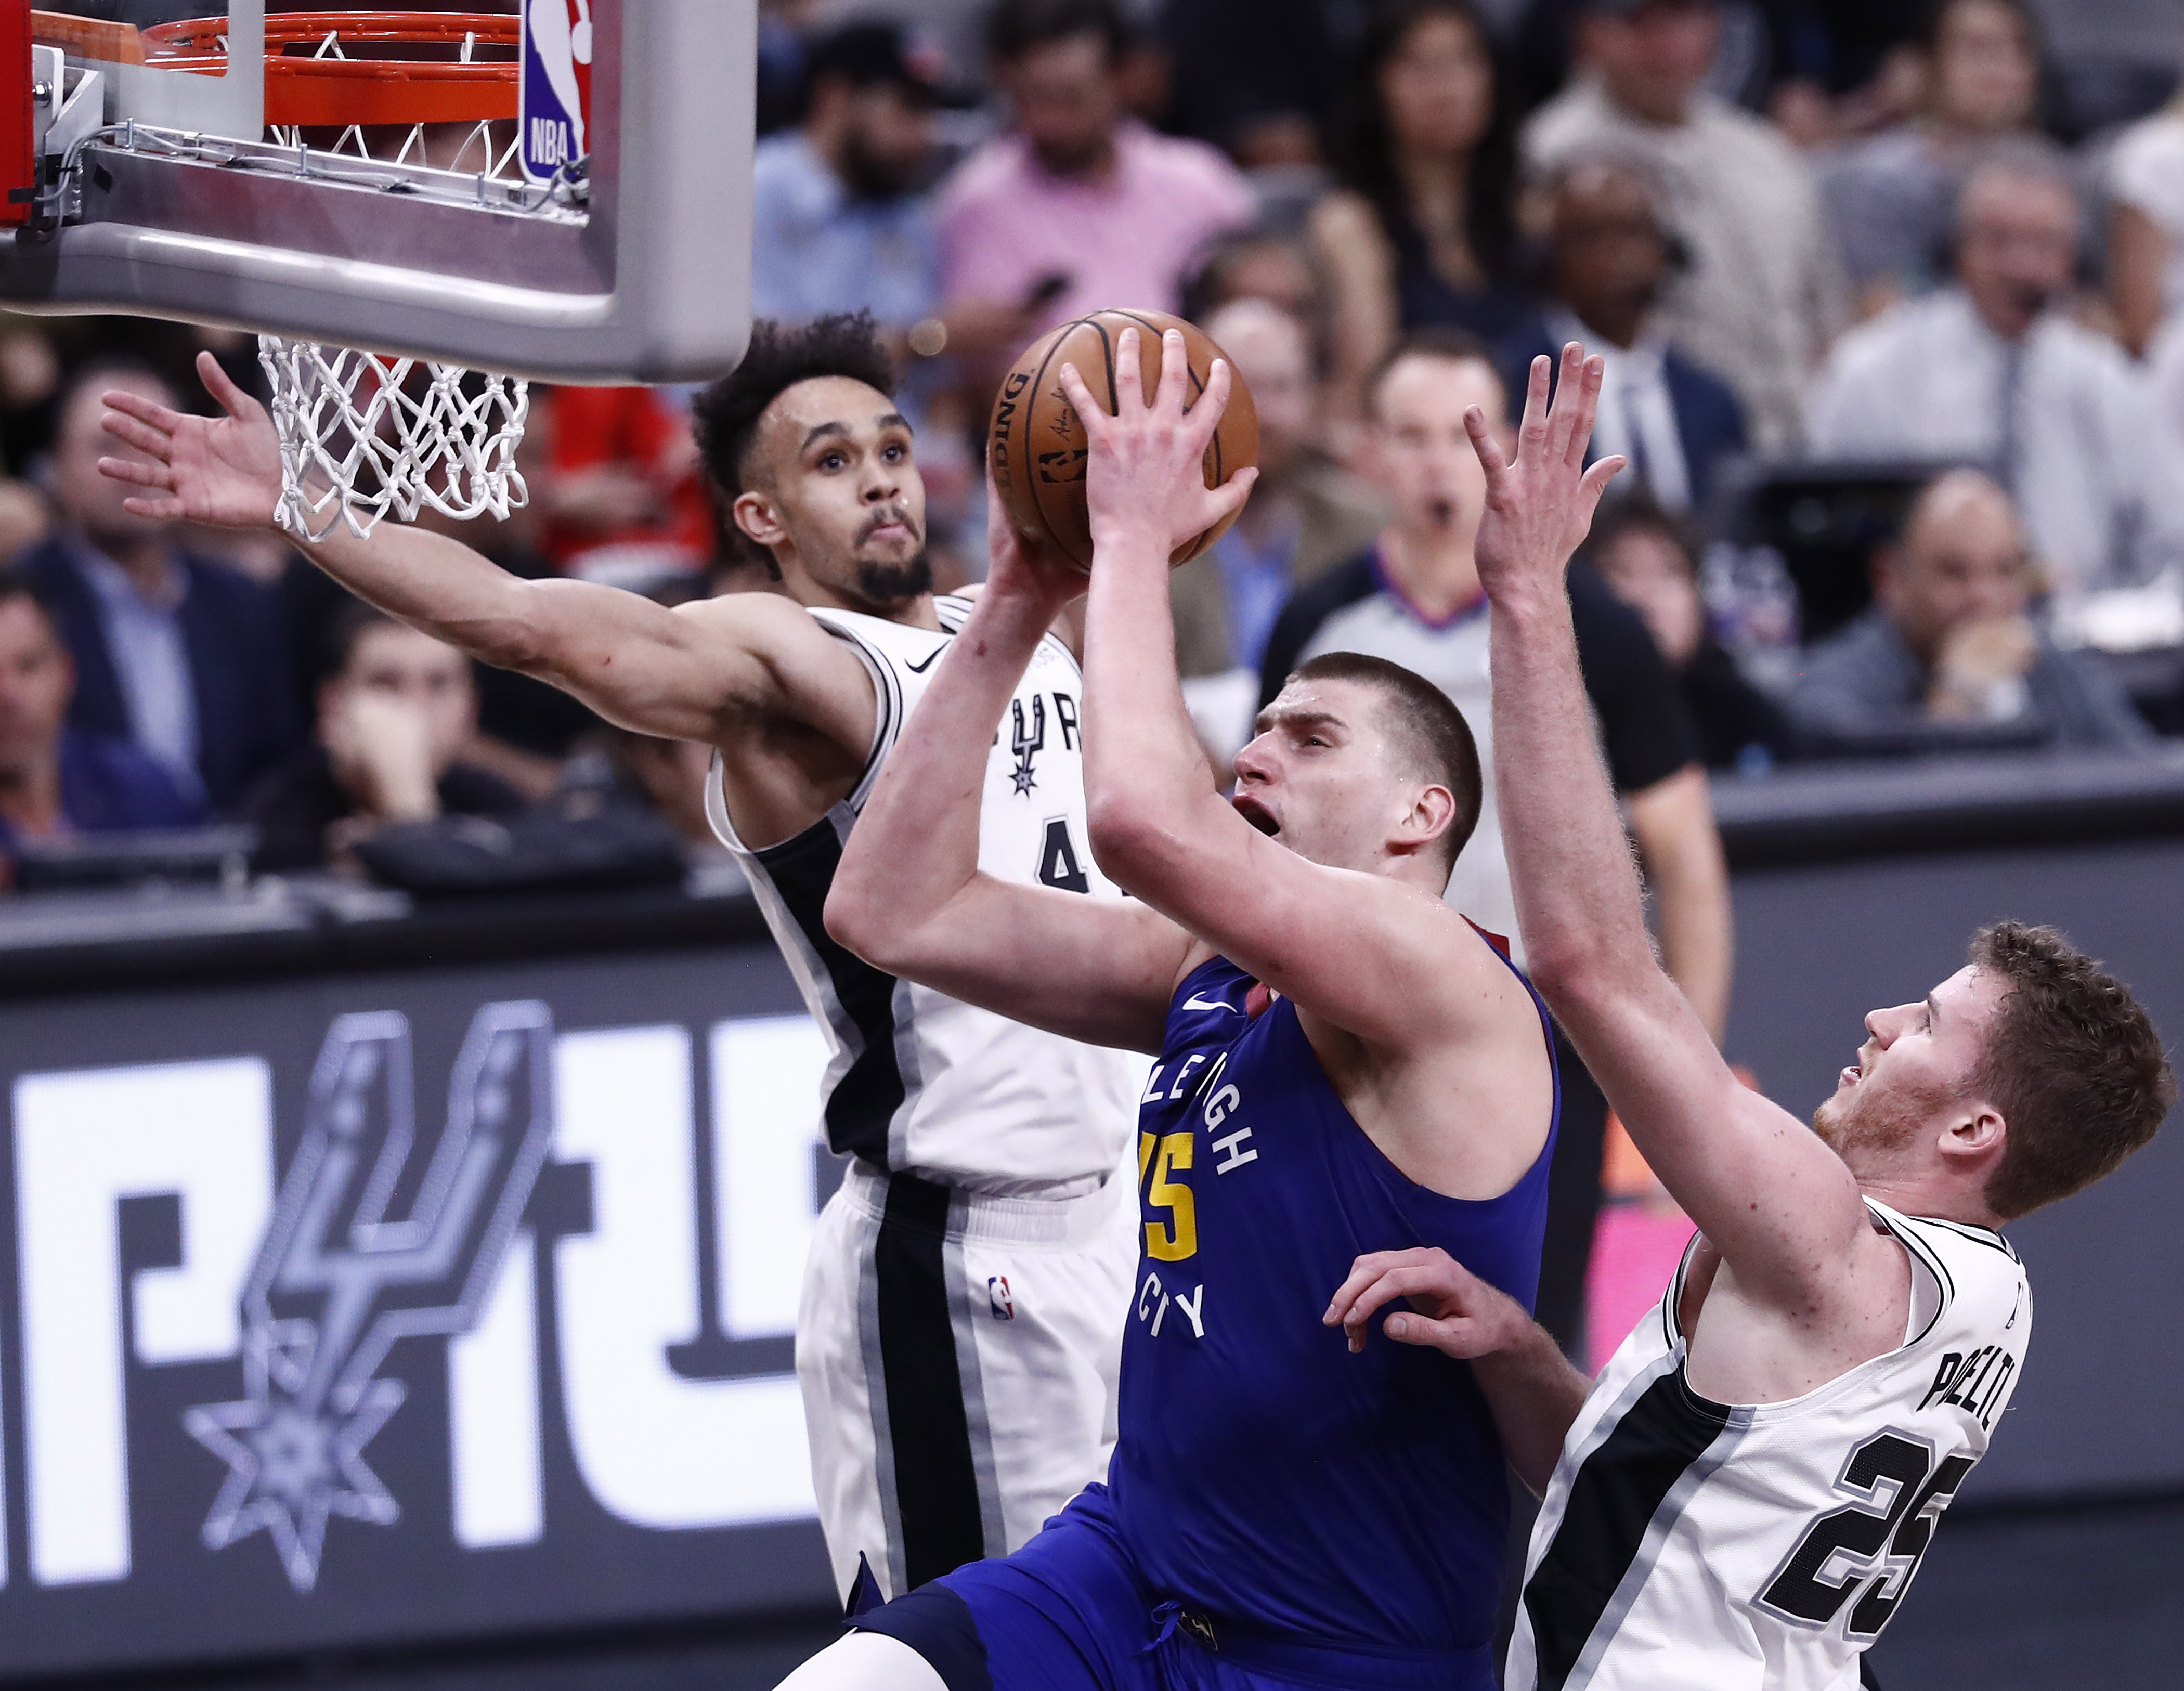 epa07528825 Denver Nuggets player Nikola Jokic of Serbia (C) goes to the basket against San Antonio Spurs players Derrick White (L) and Jakob Poeltl of Austria (R) during the NBA Western Conference Playoffs game six at the AT&T Center in San Antonio, Texas, USA, 25 April 2019.  EPA/LARRY W. SMITH SHUTTERSTOCK OUT